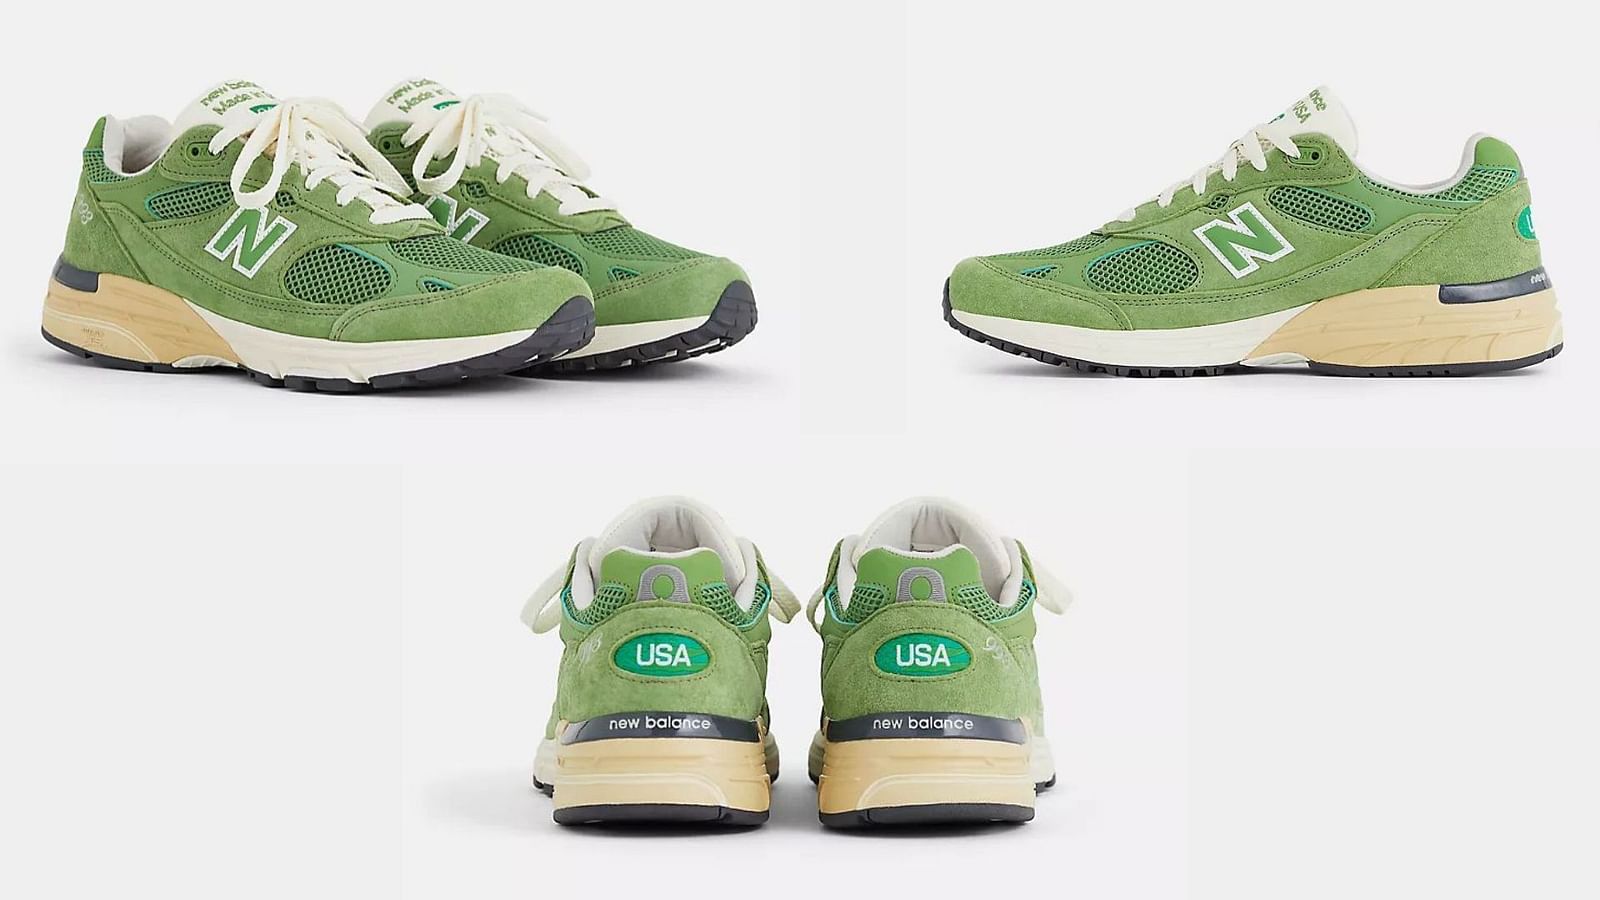 New Balance 993 “Chive” shoes: Features explored